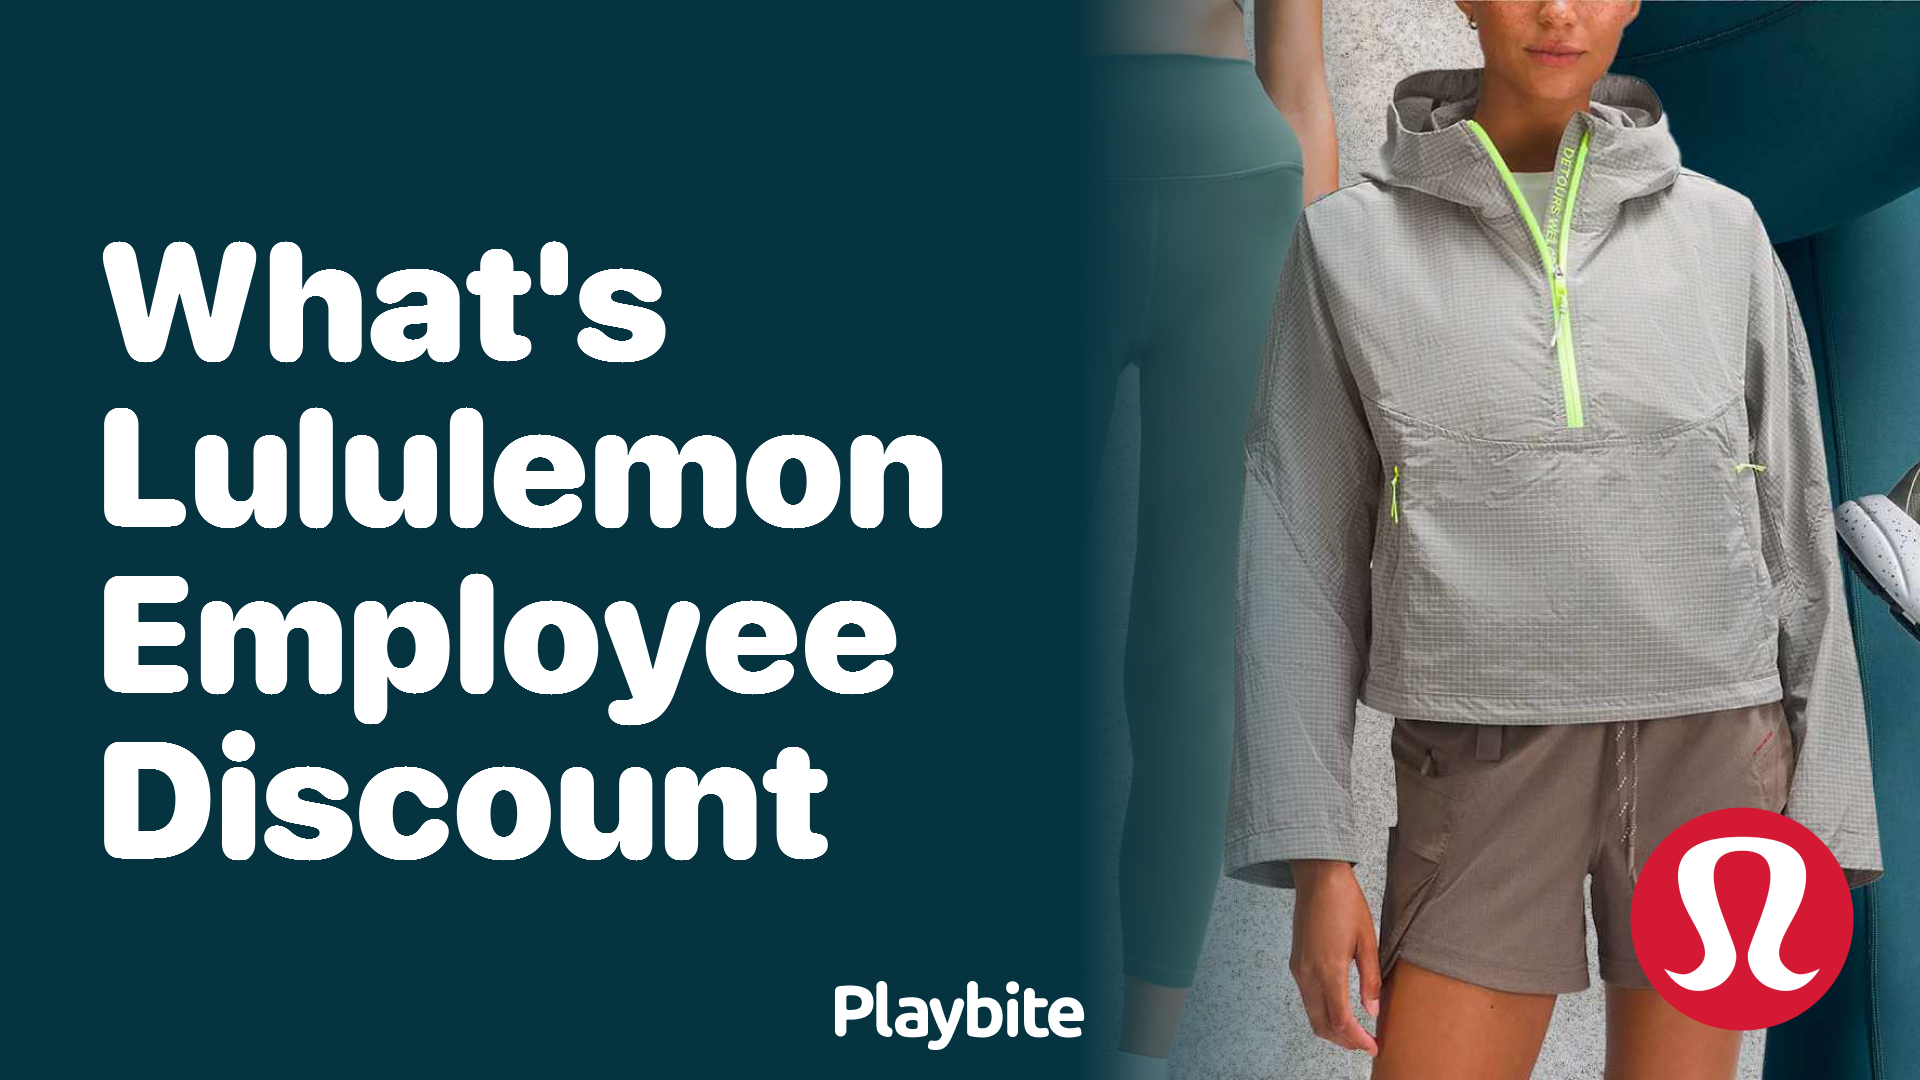 What's the Lululemon Employee Discount? - Playbite